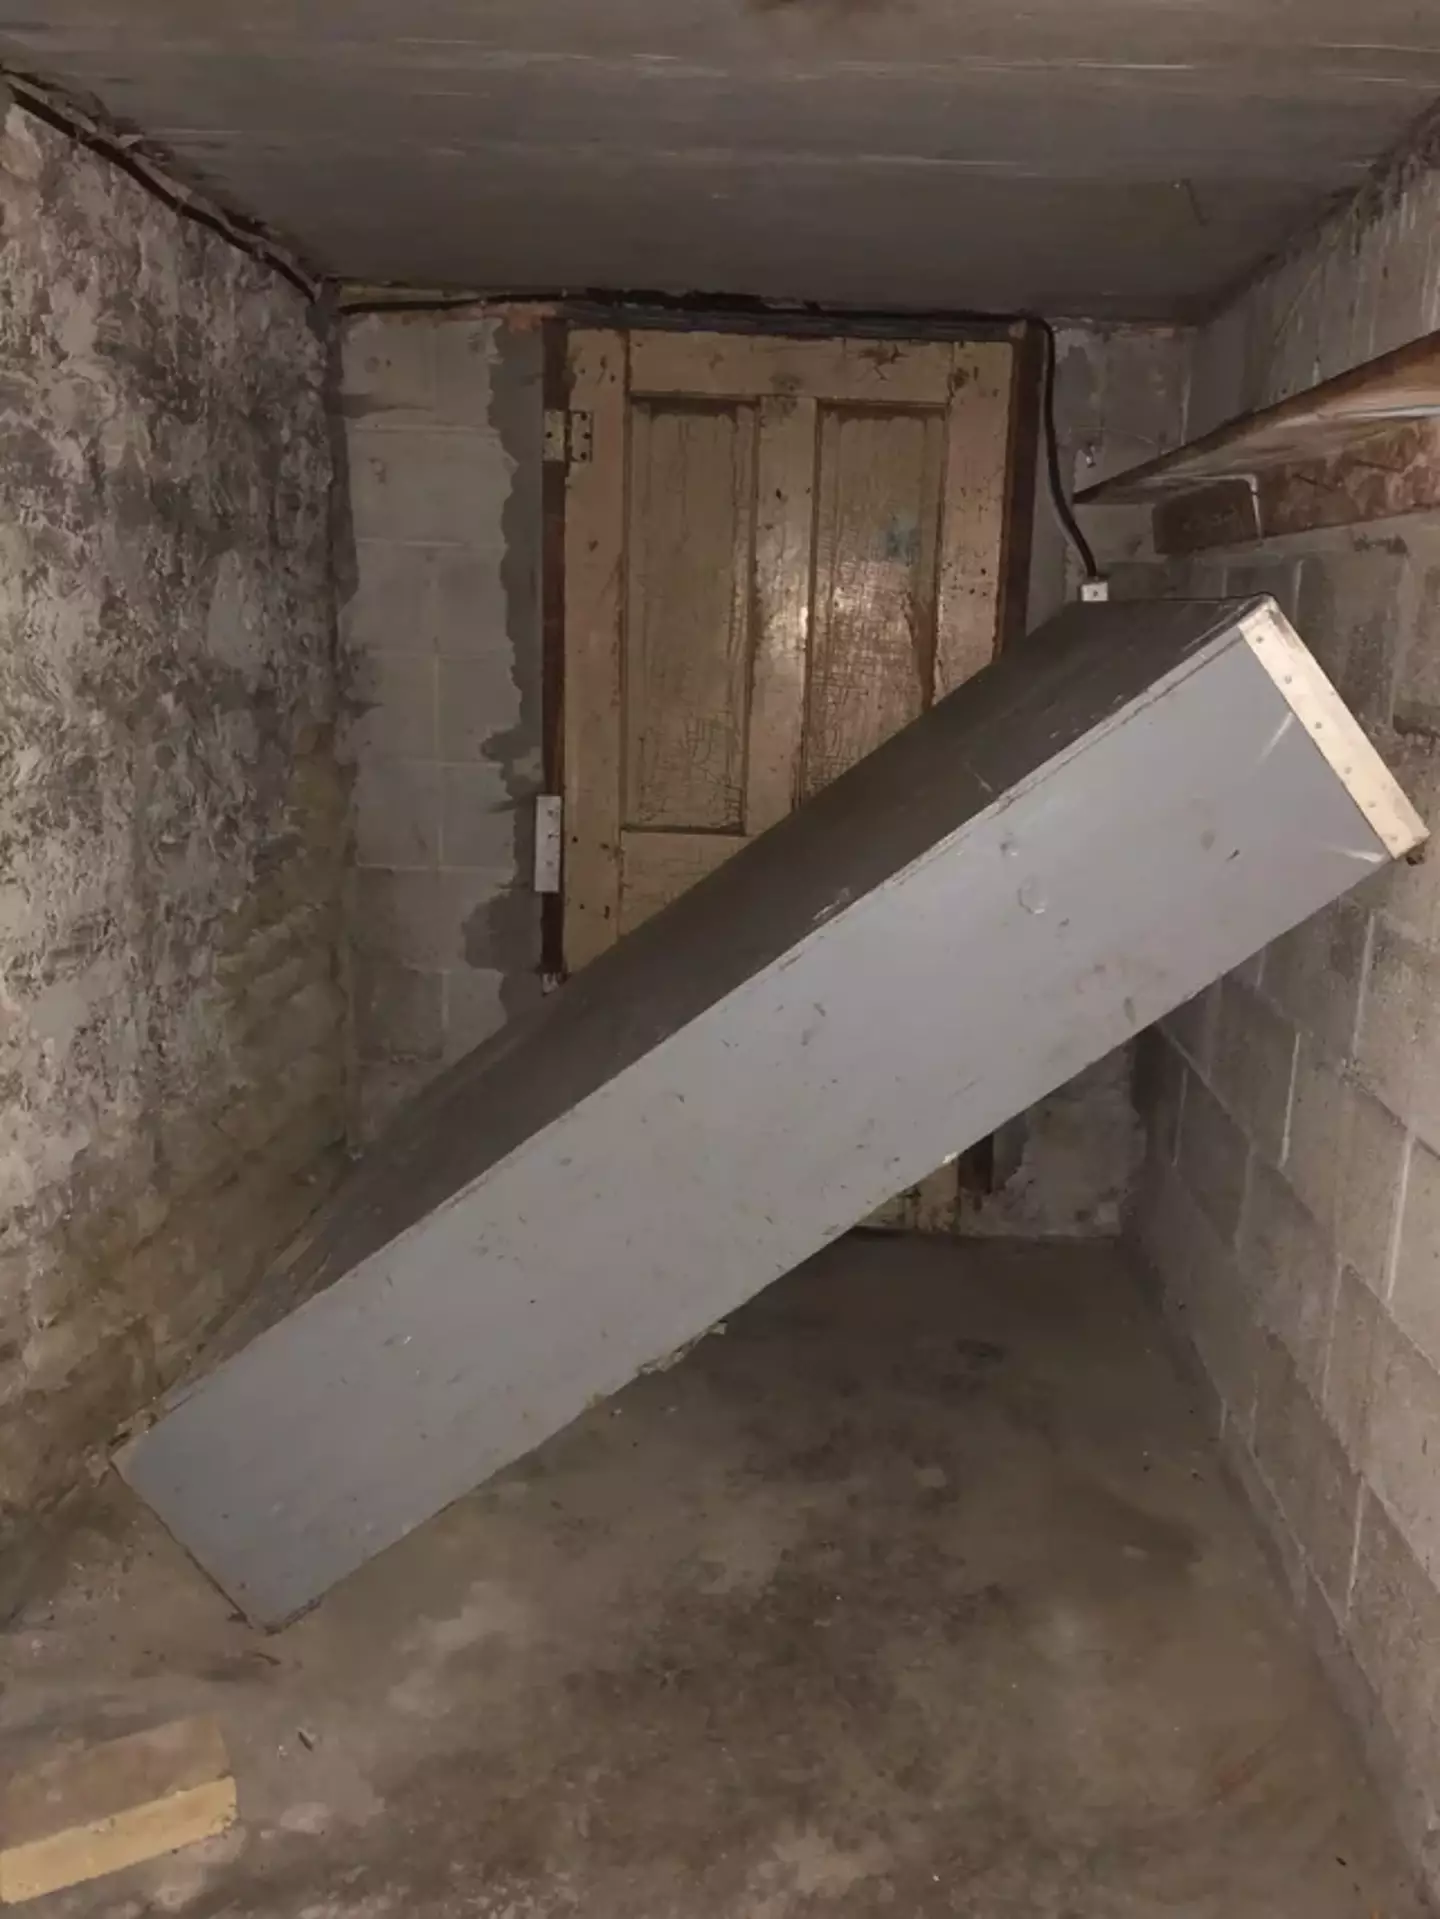 A man found a mysterious door in the basement of his new home.